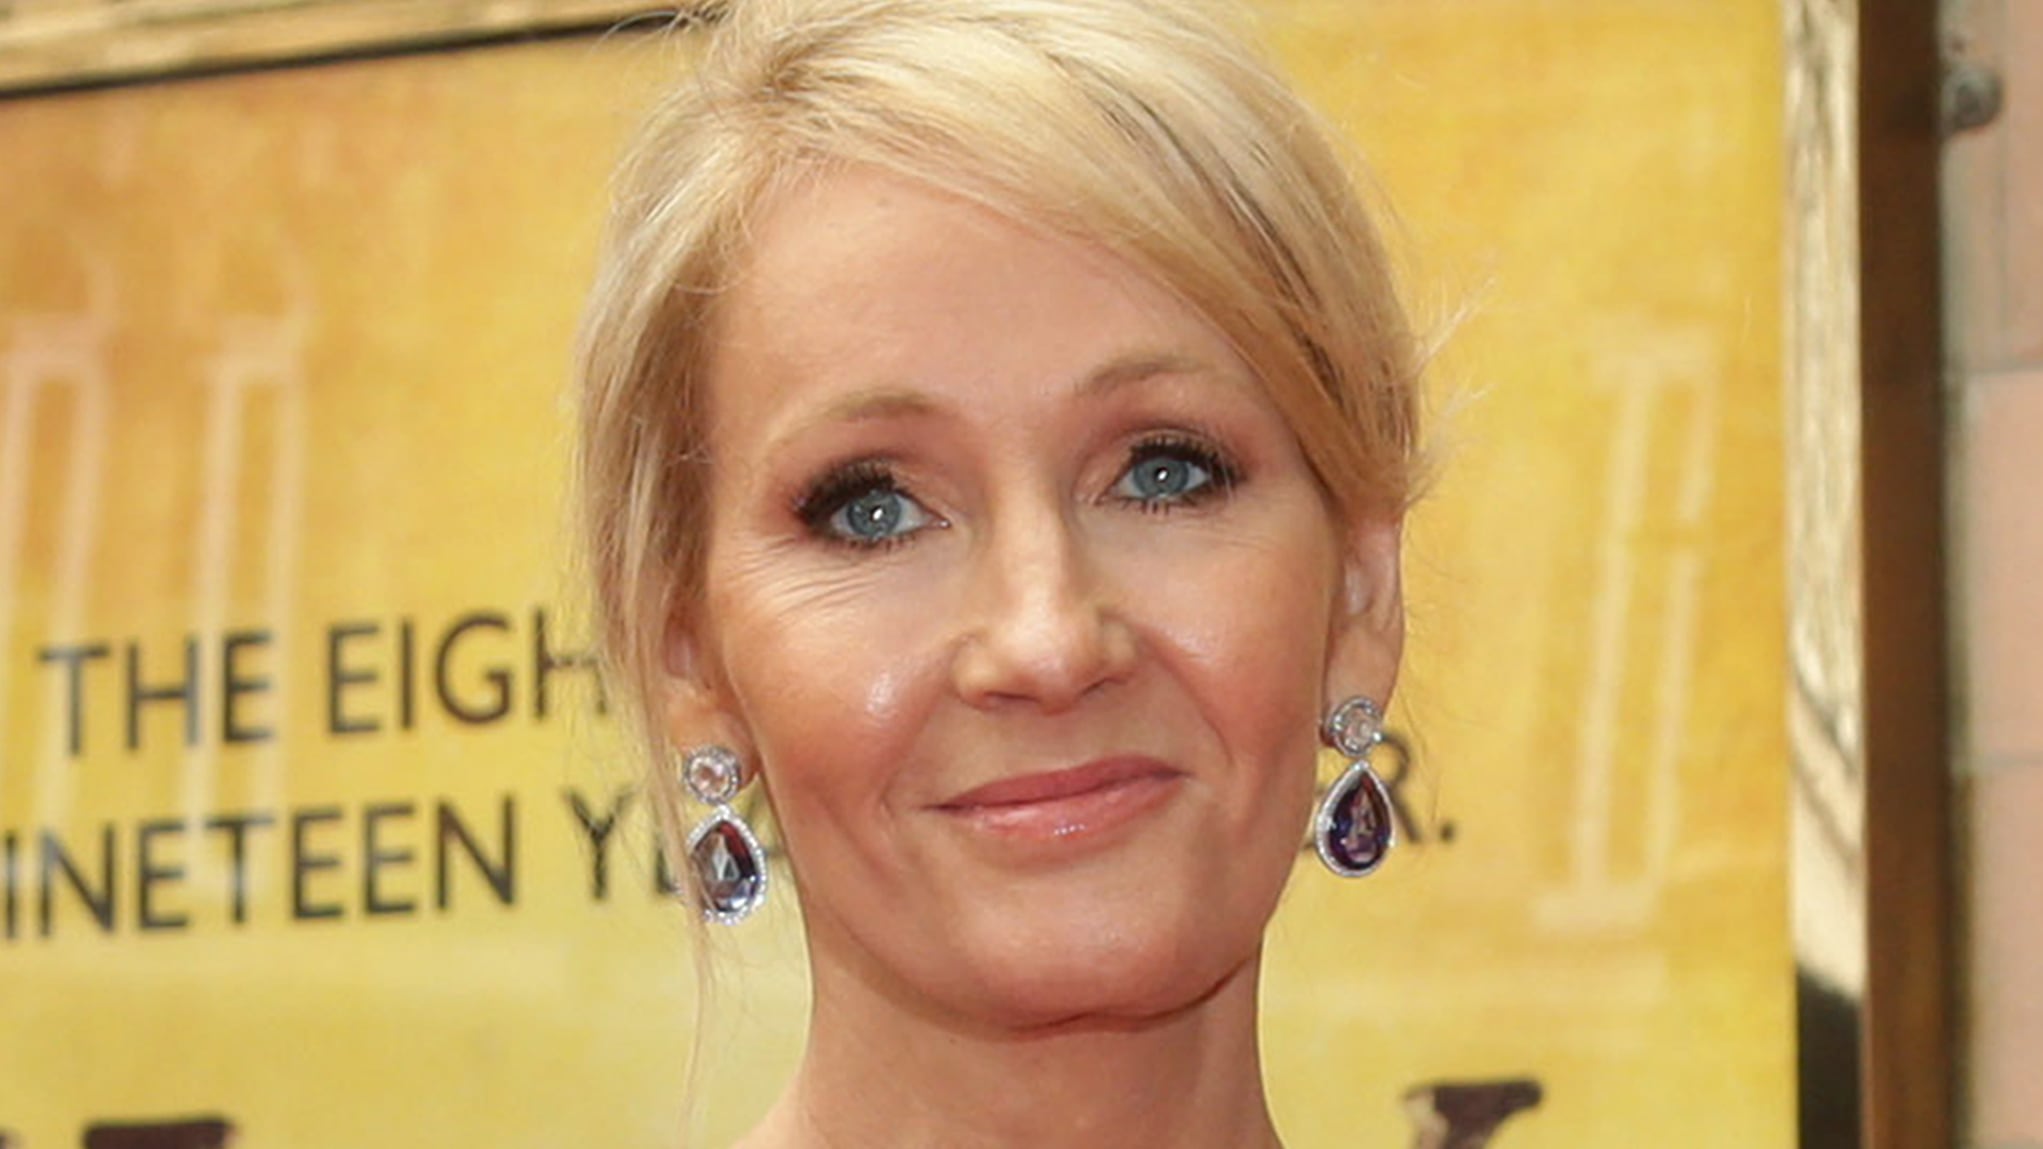 JK Rowling made a series of comments on social media after Scotland’s new hate crime laws came into effect